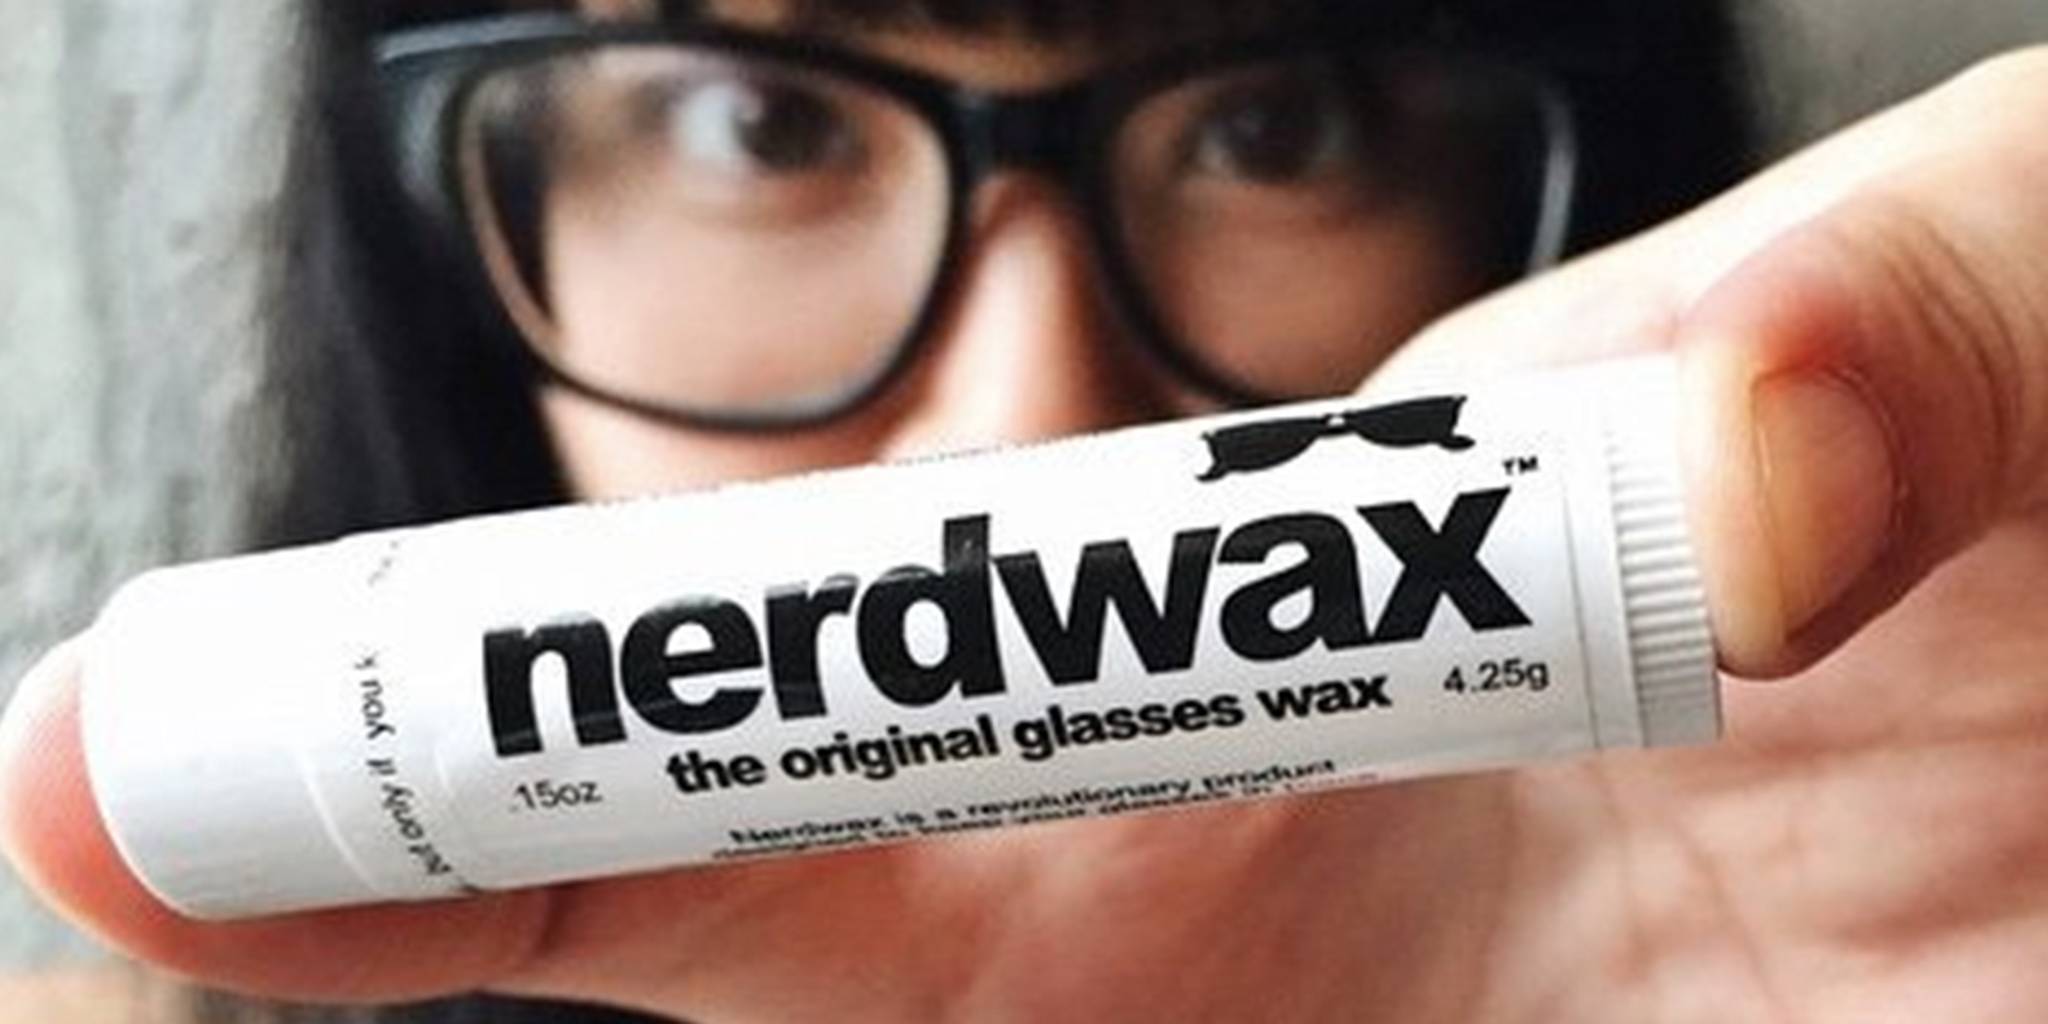 Nerdwax is the $11 Product that will Keep Your Glasses in Place